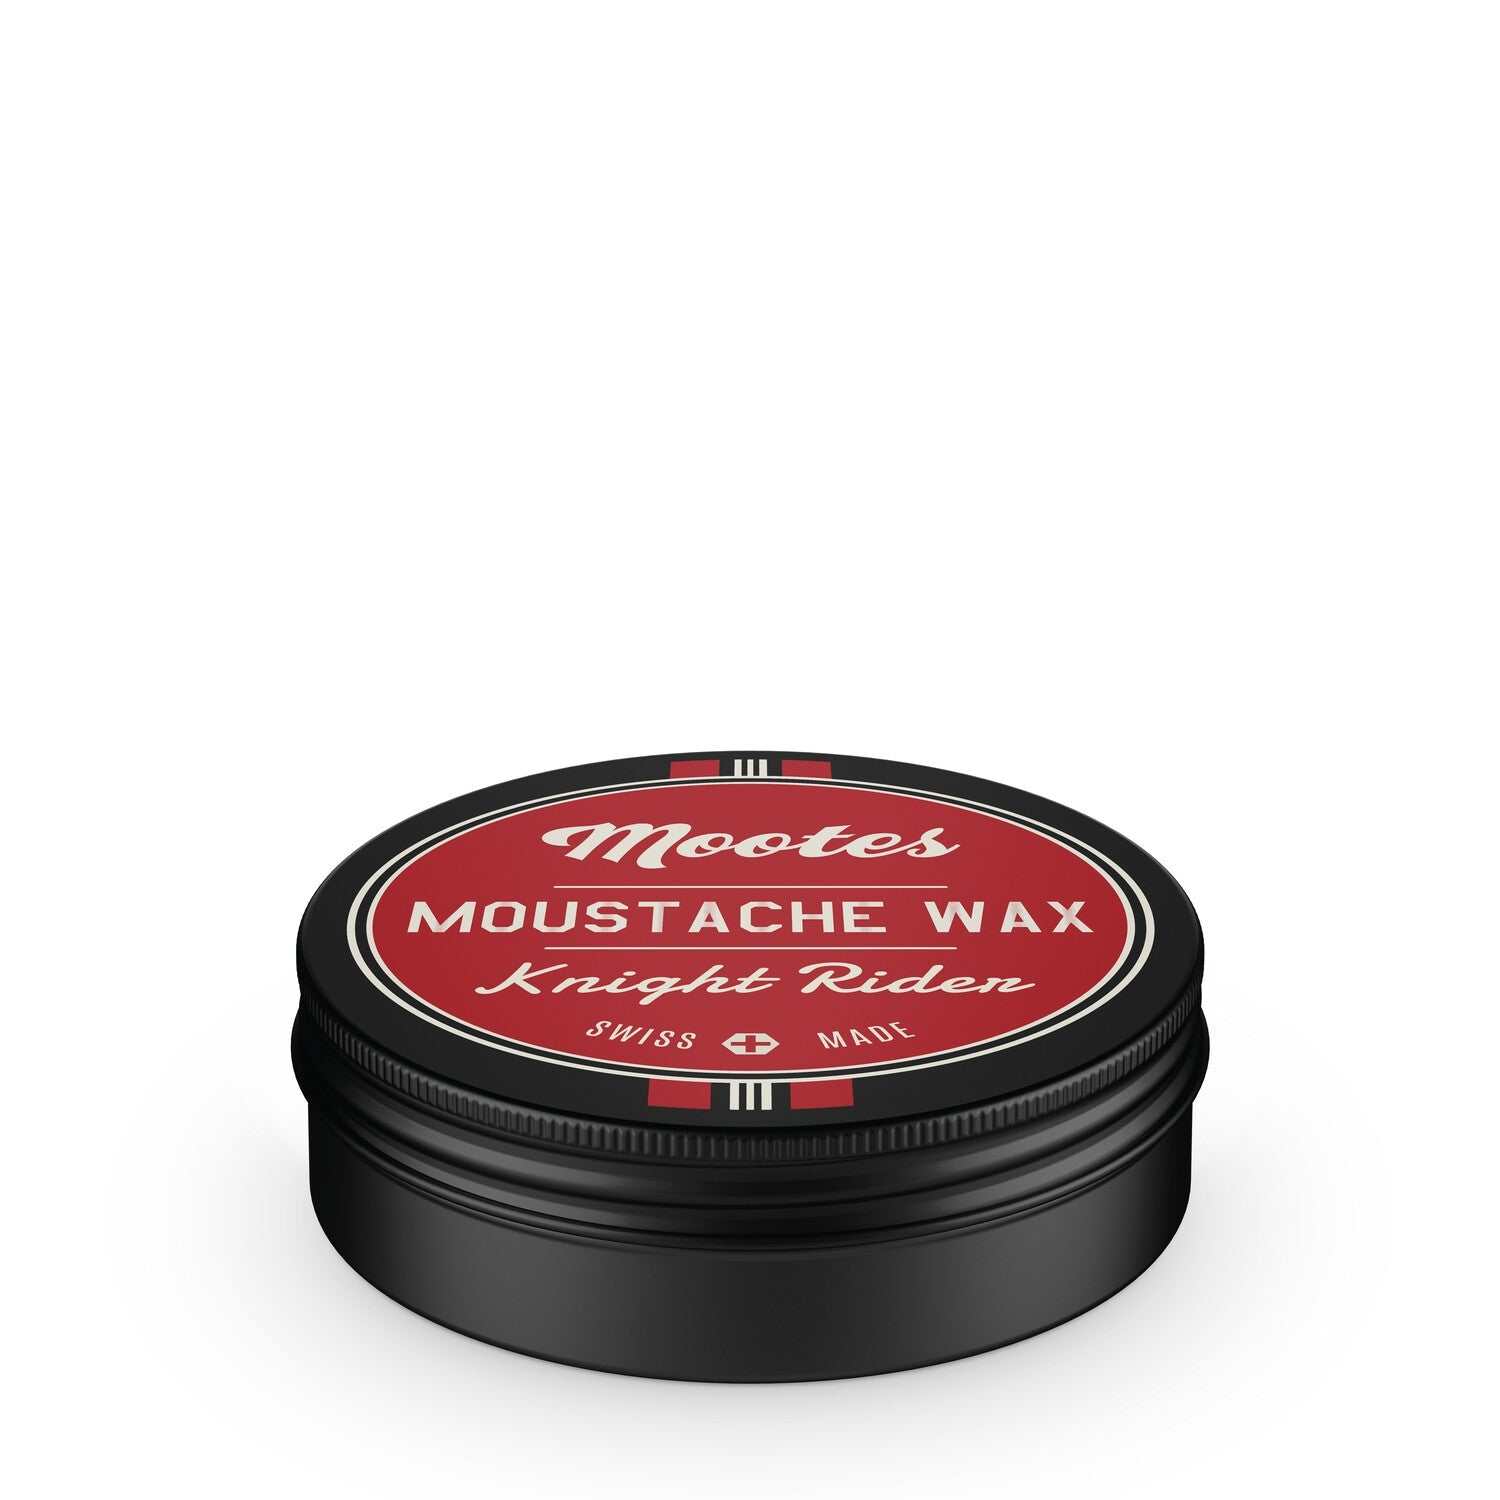 Mootes Moustache Wax Knight Rider